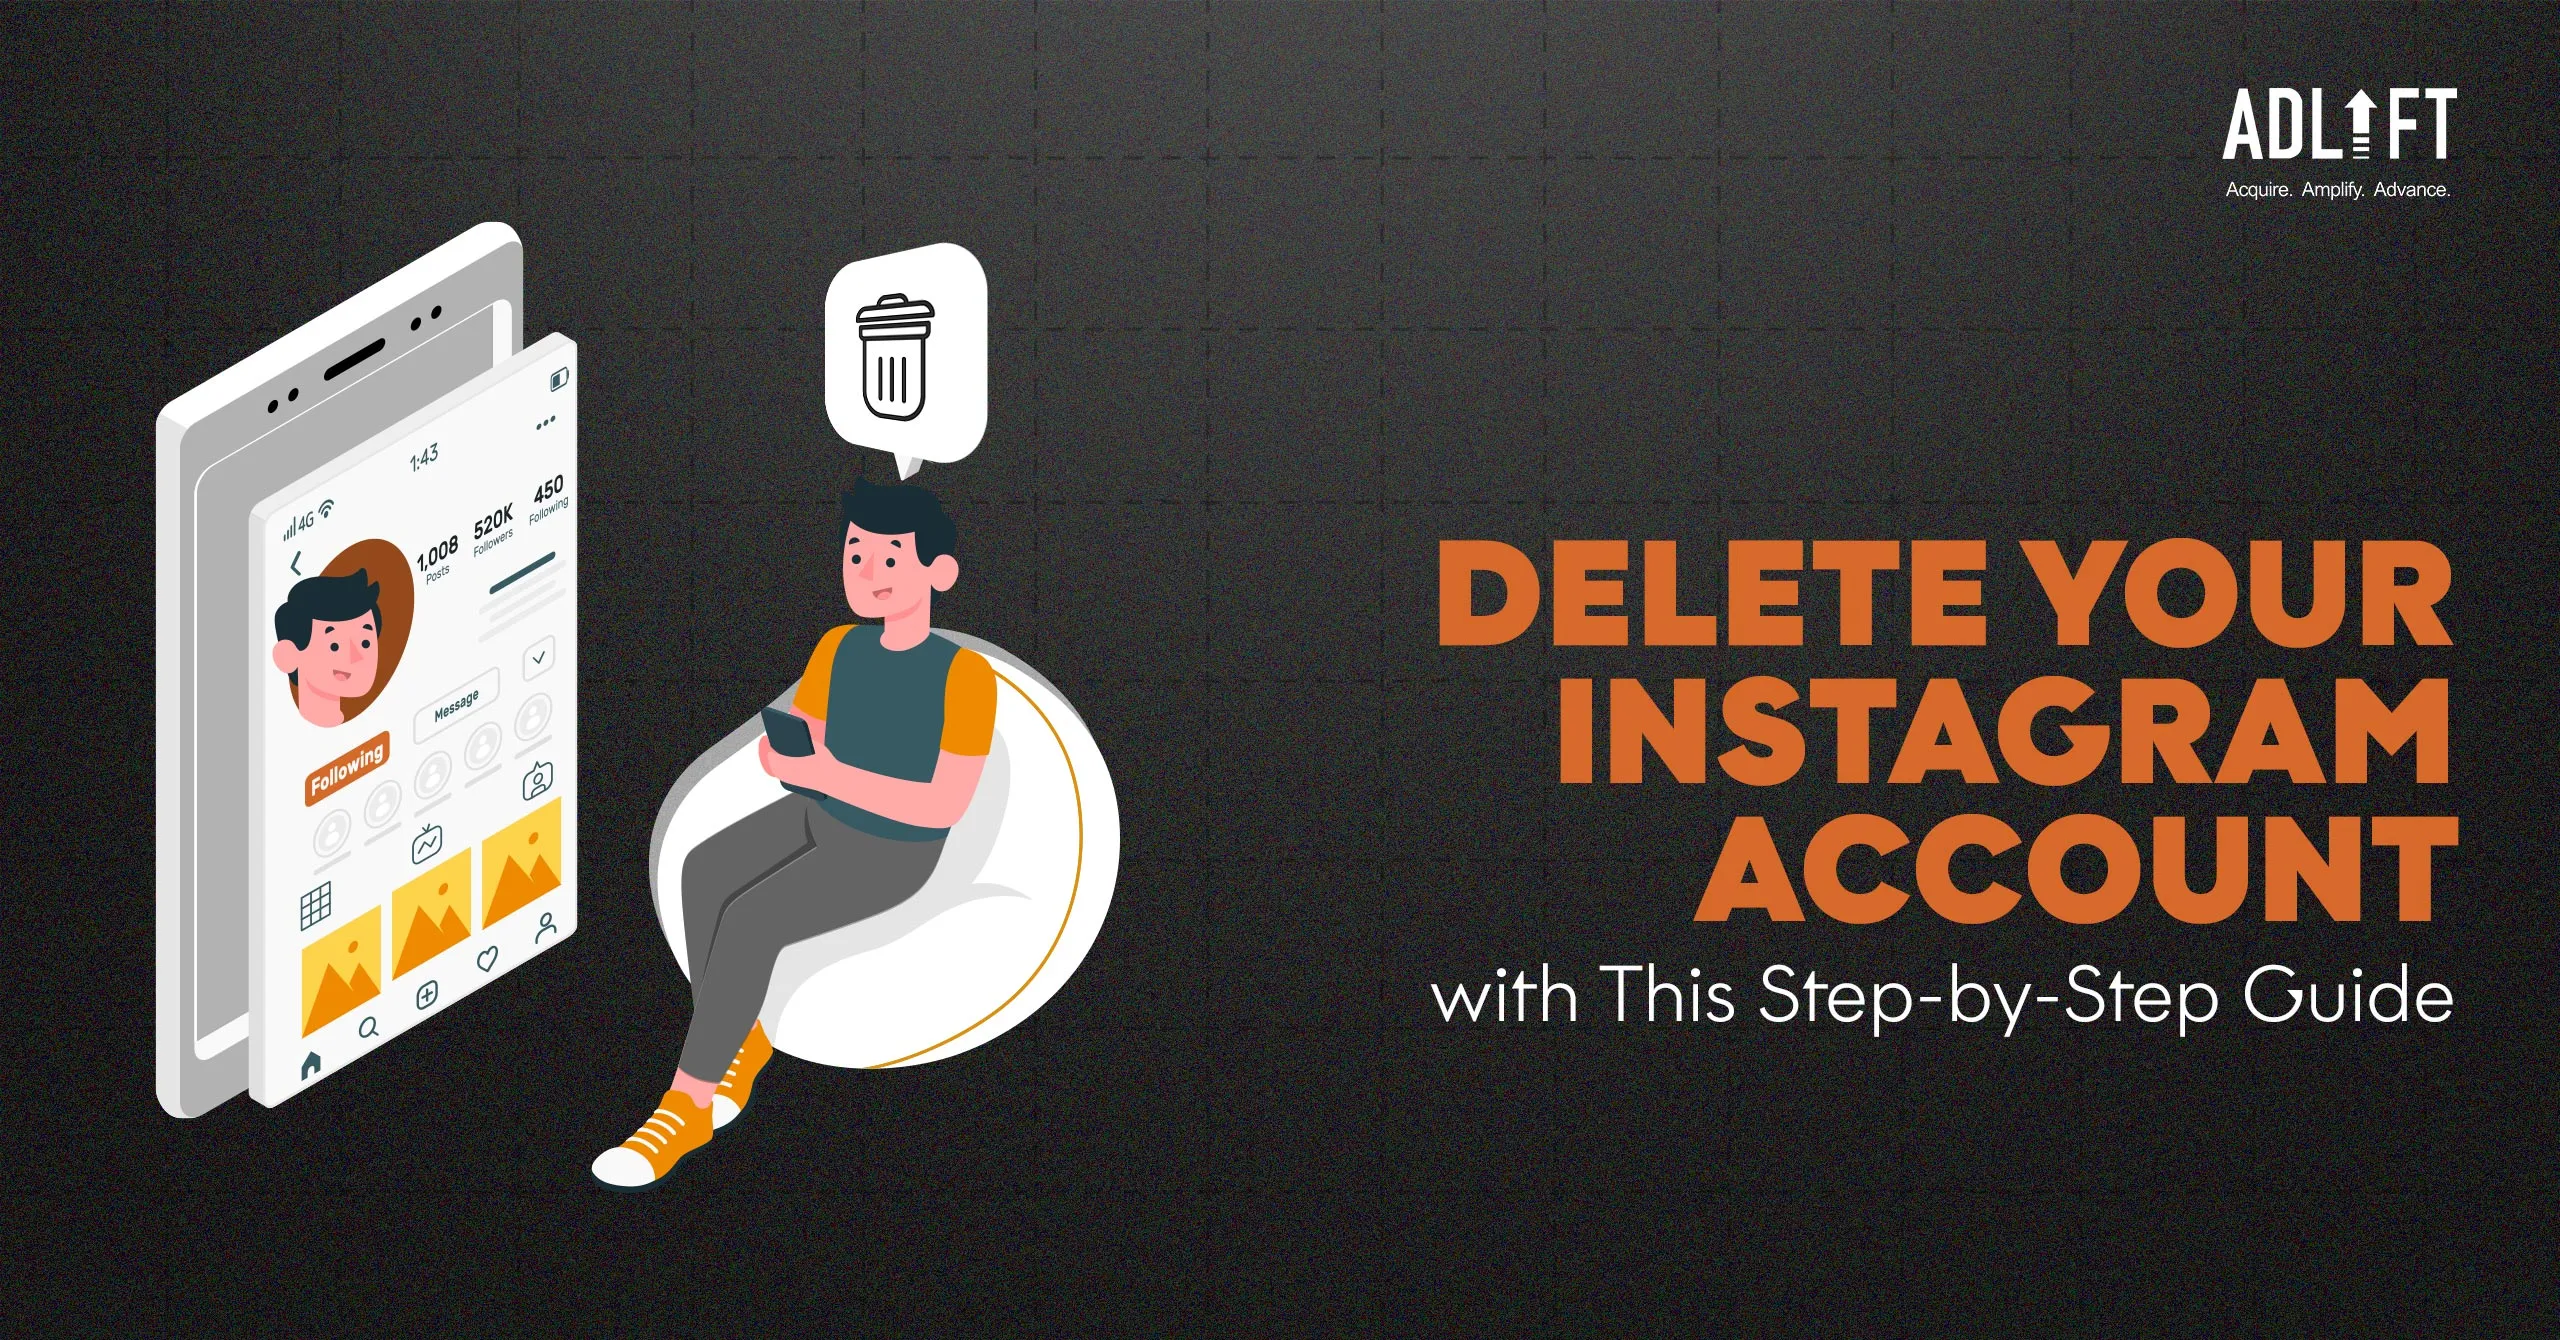 Step-by-Step Guide: How to Delete Your Instagram Account